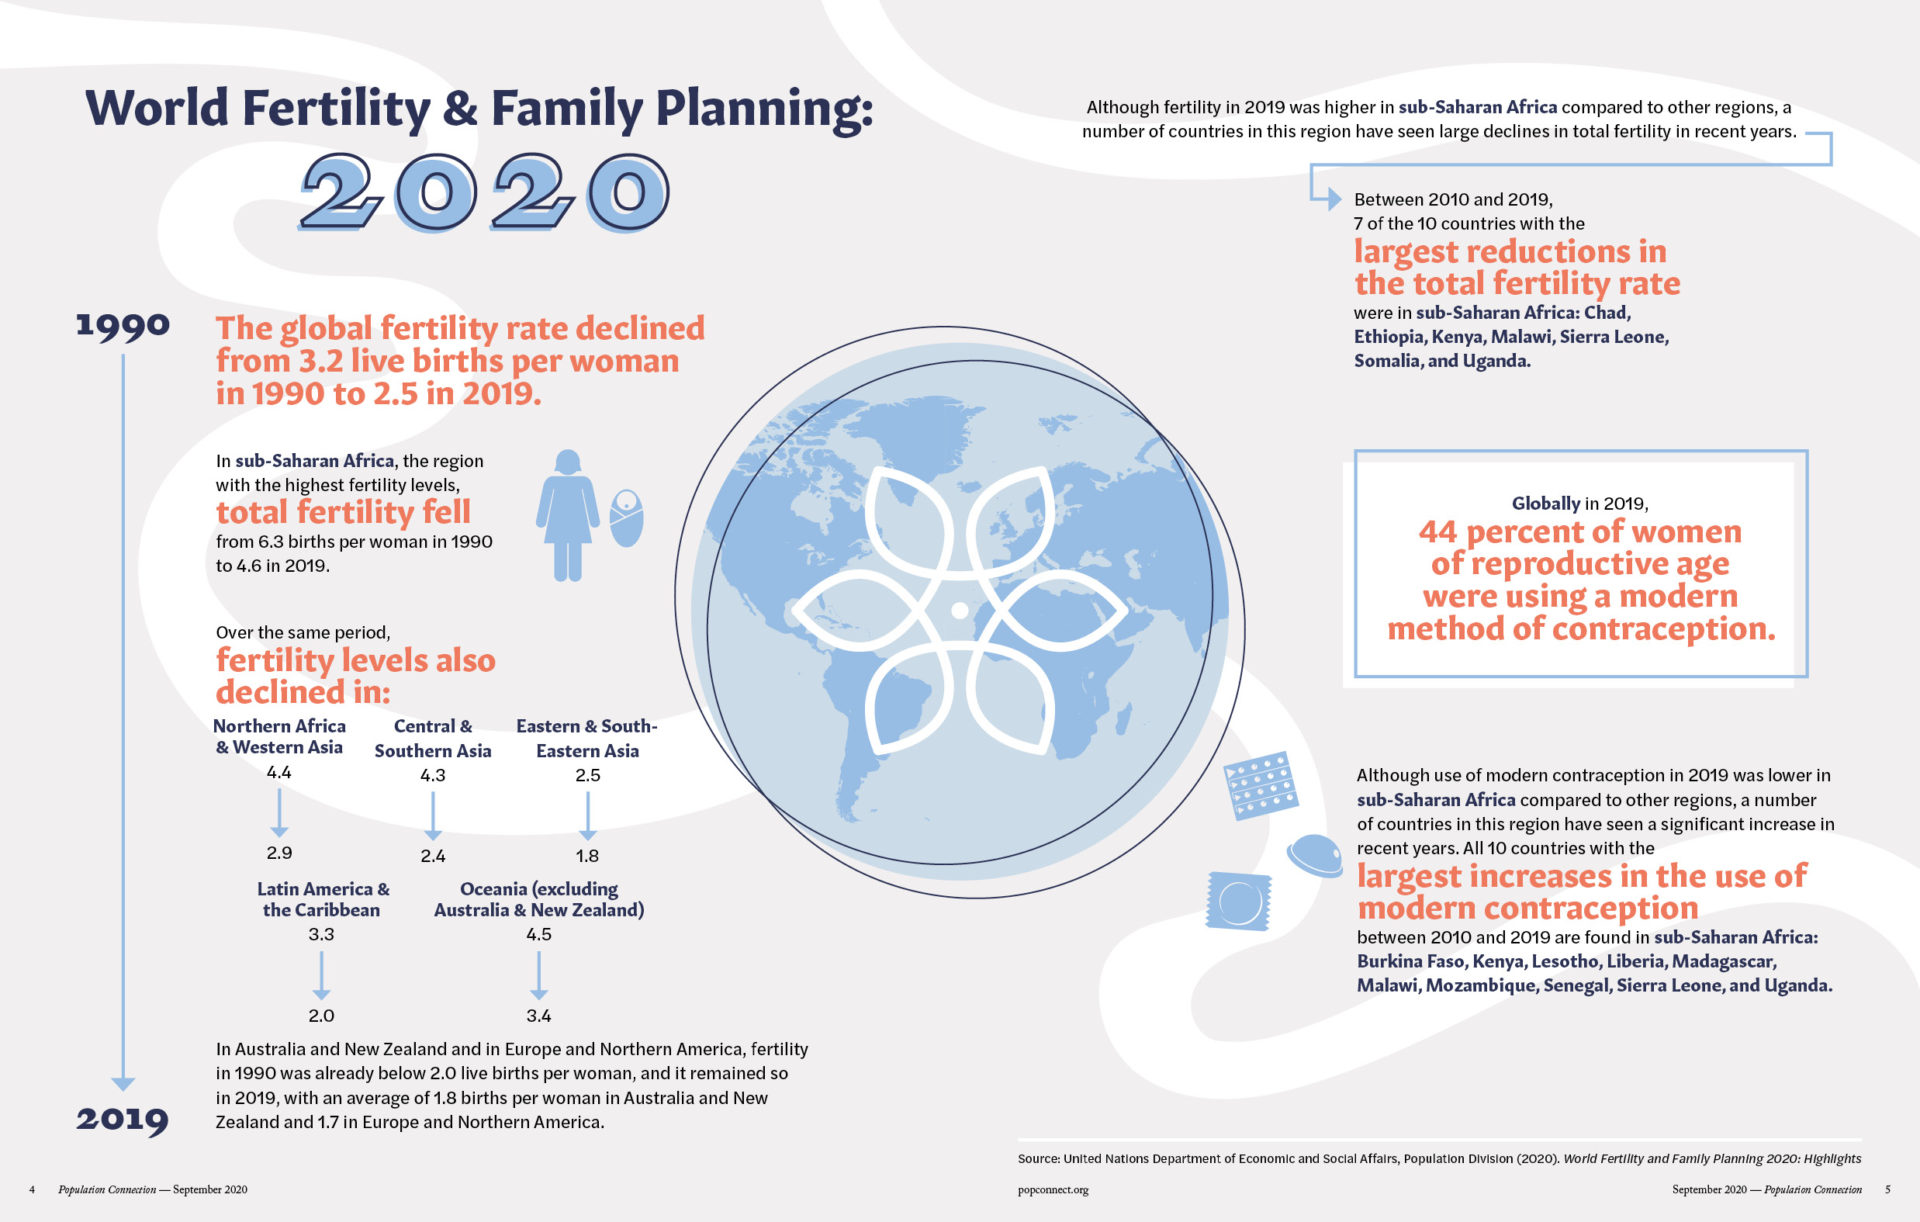 infographic for World Fertility & Family Planning 2020. Facts highlighted are 